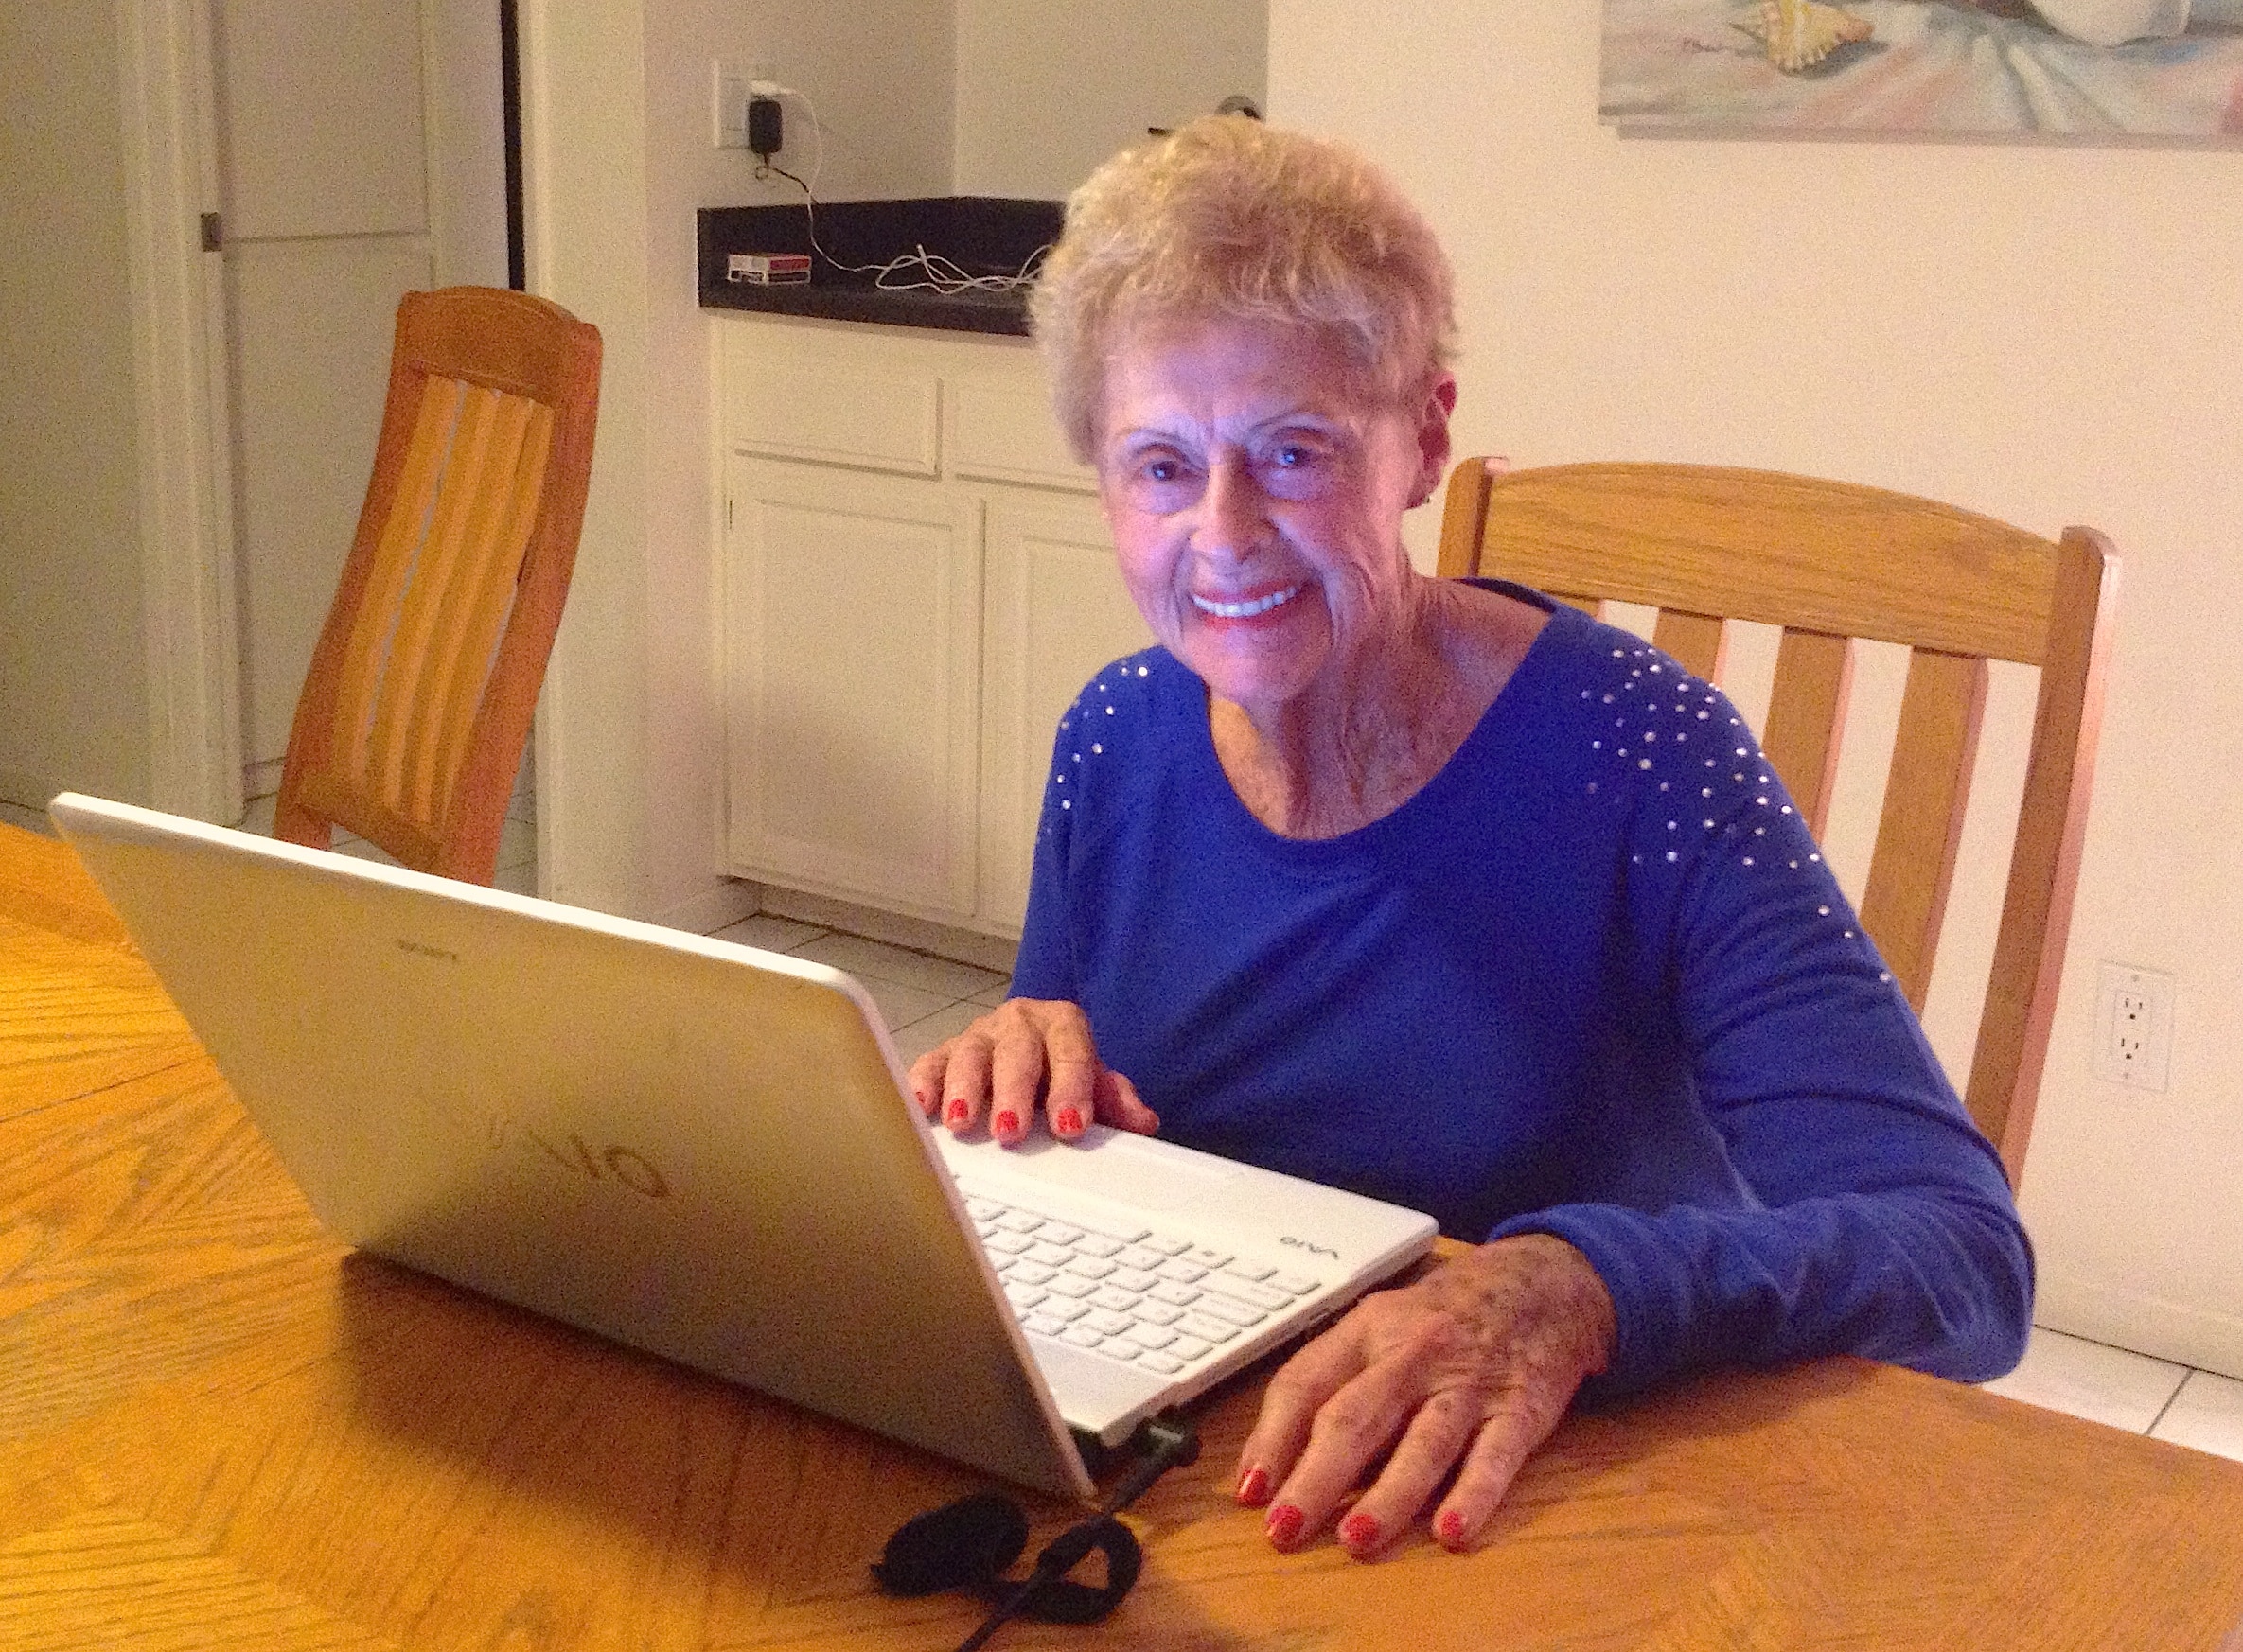 Elders’ Resistance To Using Technology: Challenges With Mom, AgingParents.com